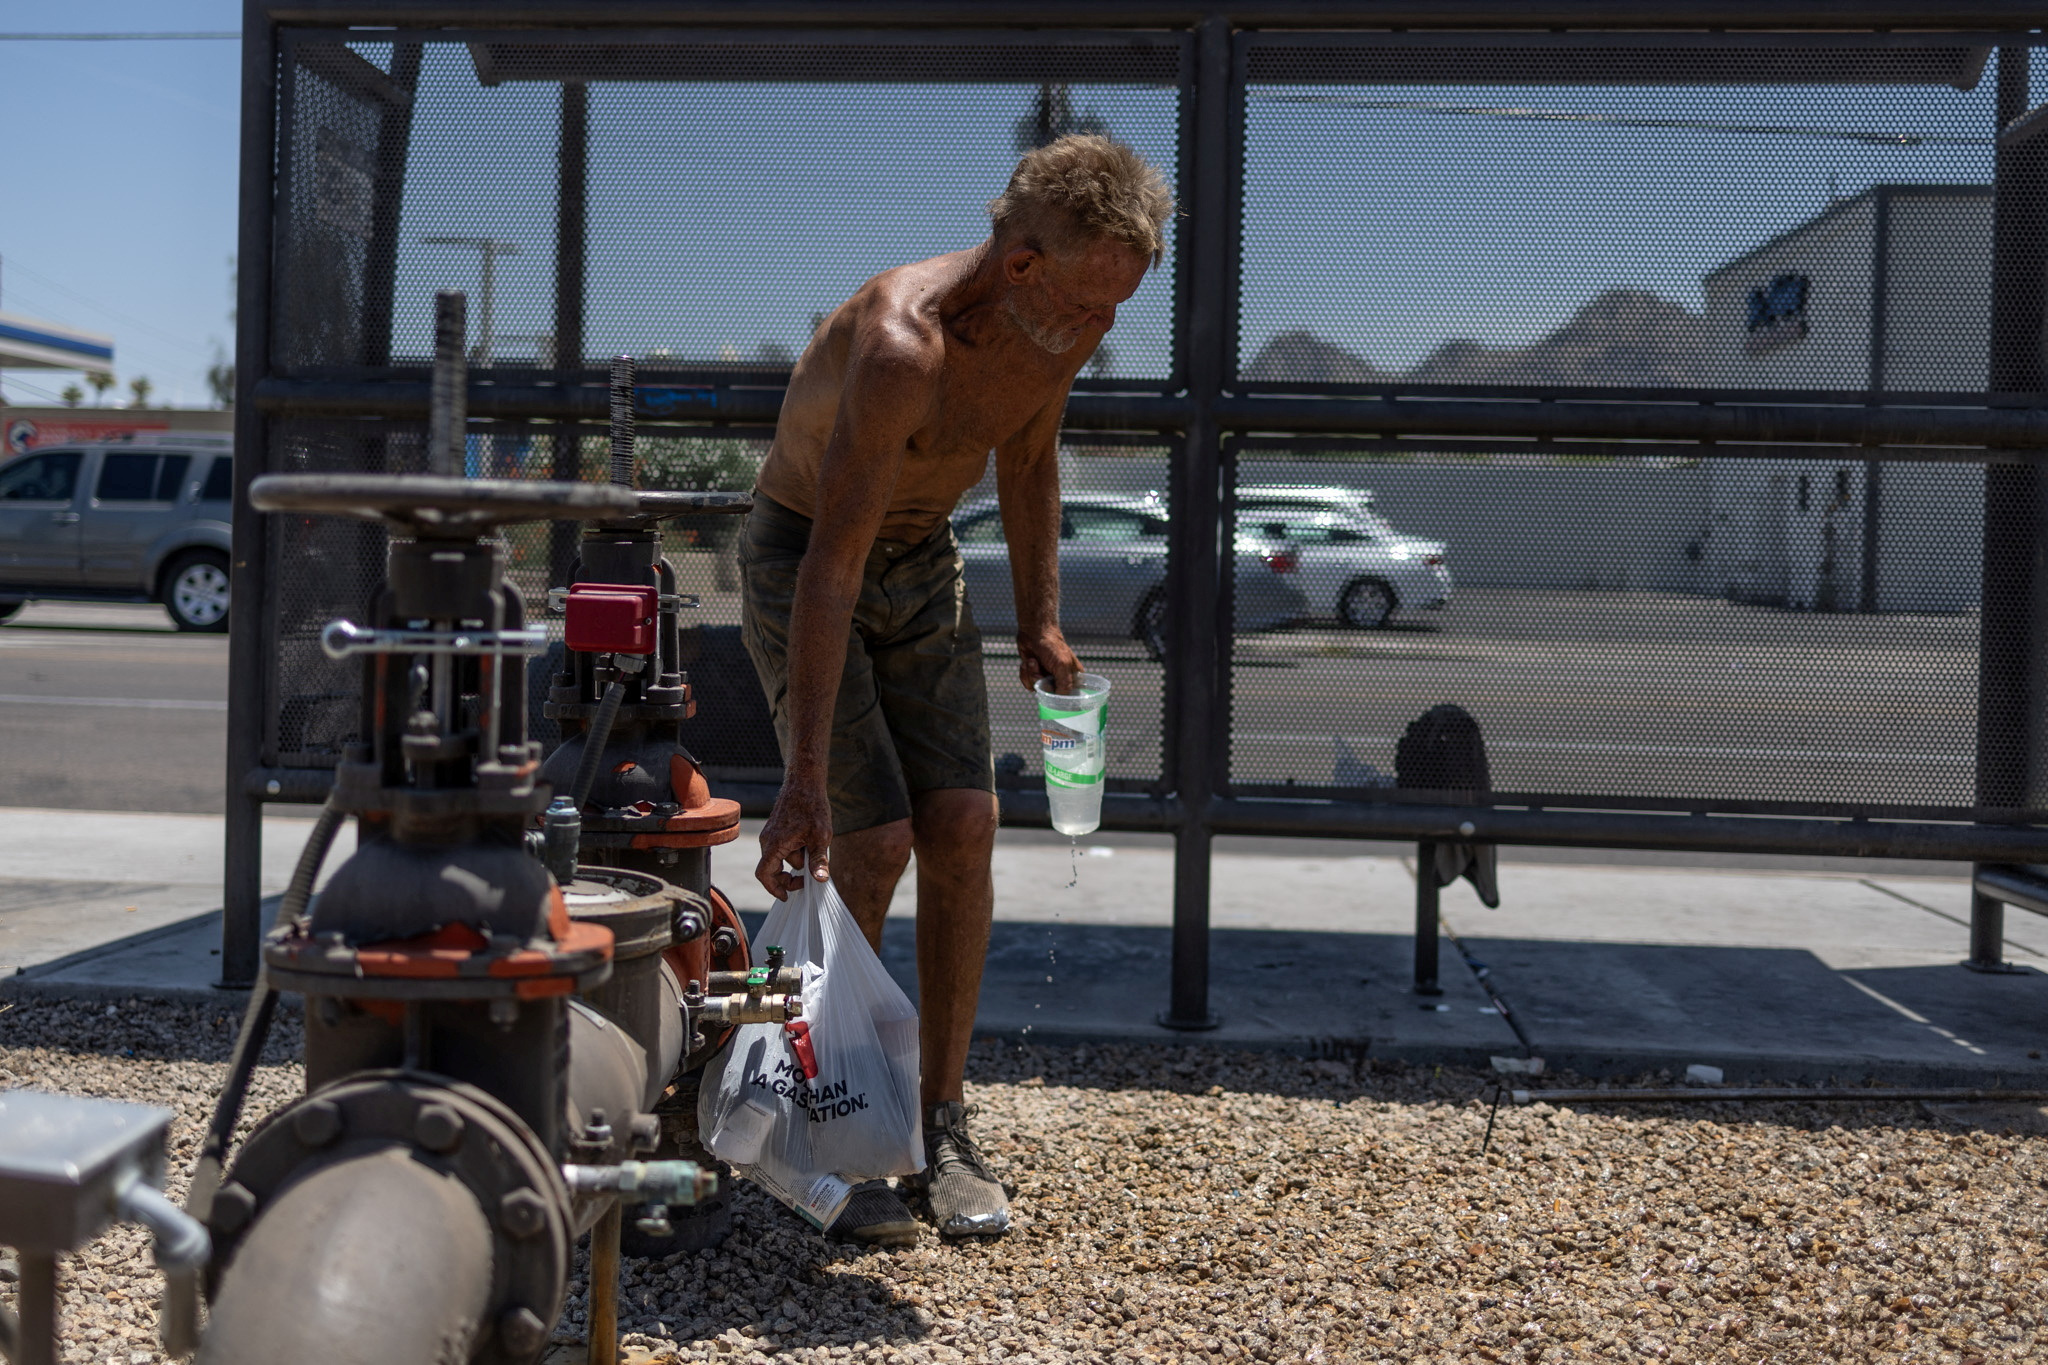 Season's first heat wave to scorch parts of Western, Southern U.S.